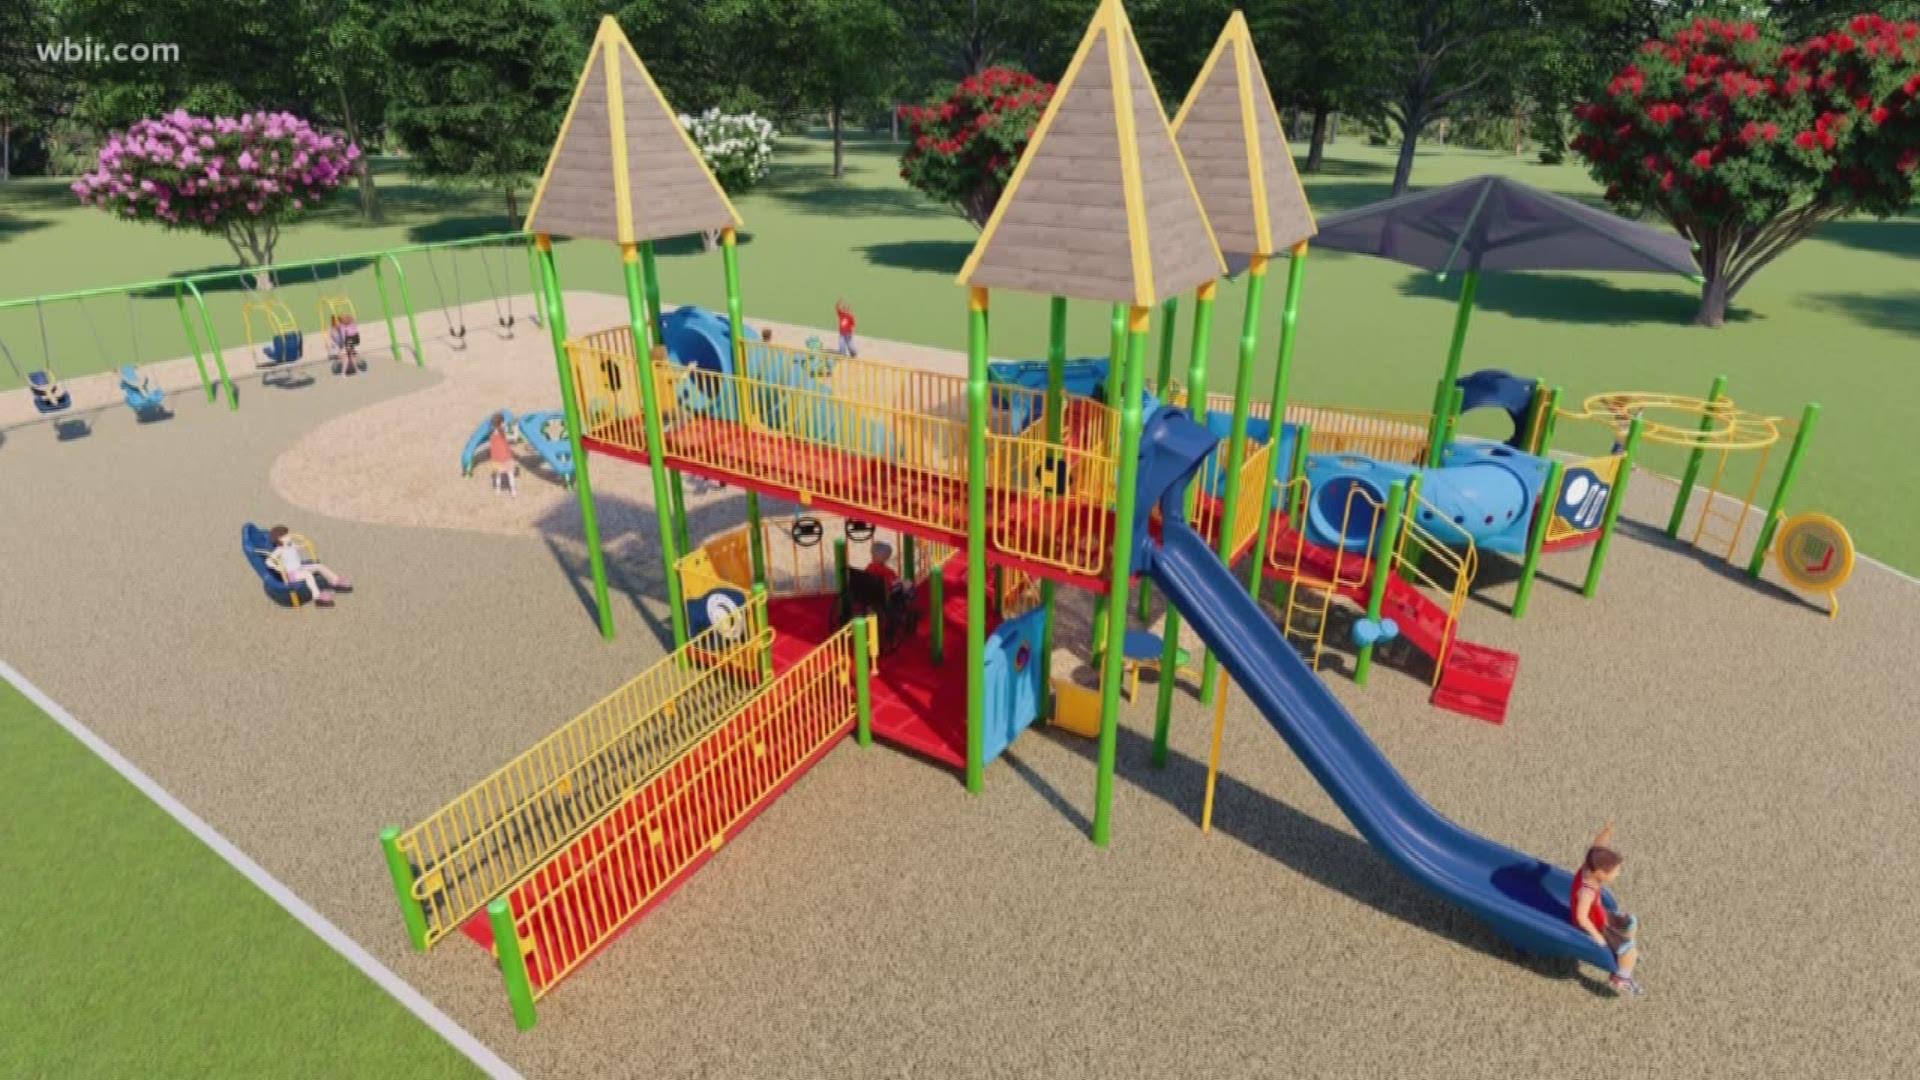 The push to build an inclusive playground is moving forward without donations from the Maryville Kiwanis Club.